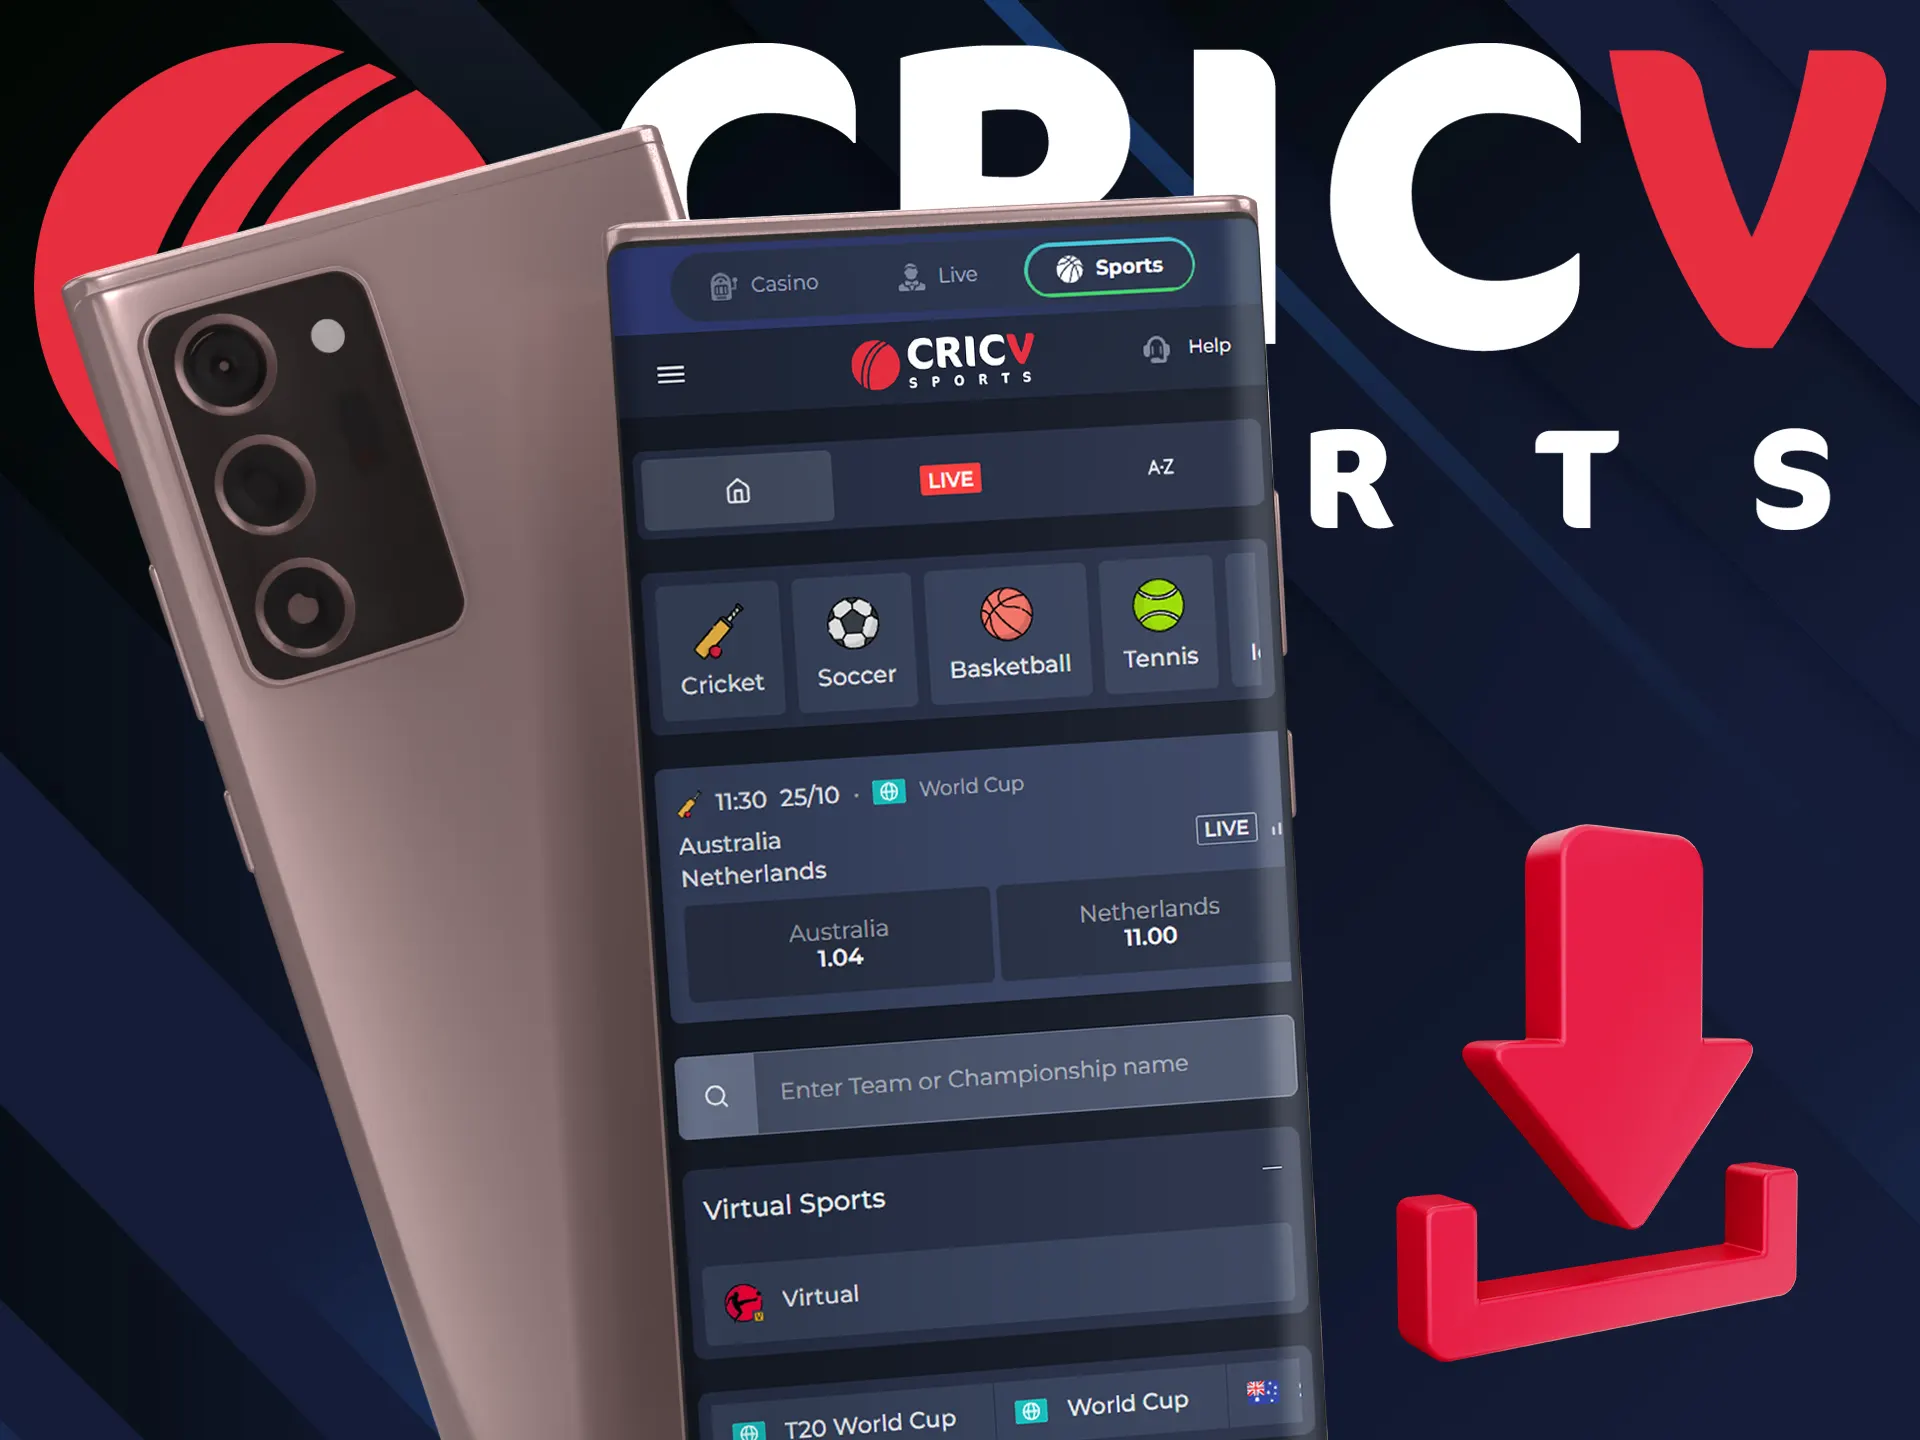 Open the web version of CricV and download the apk file to your smartphone.